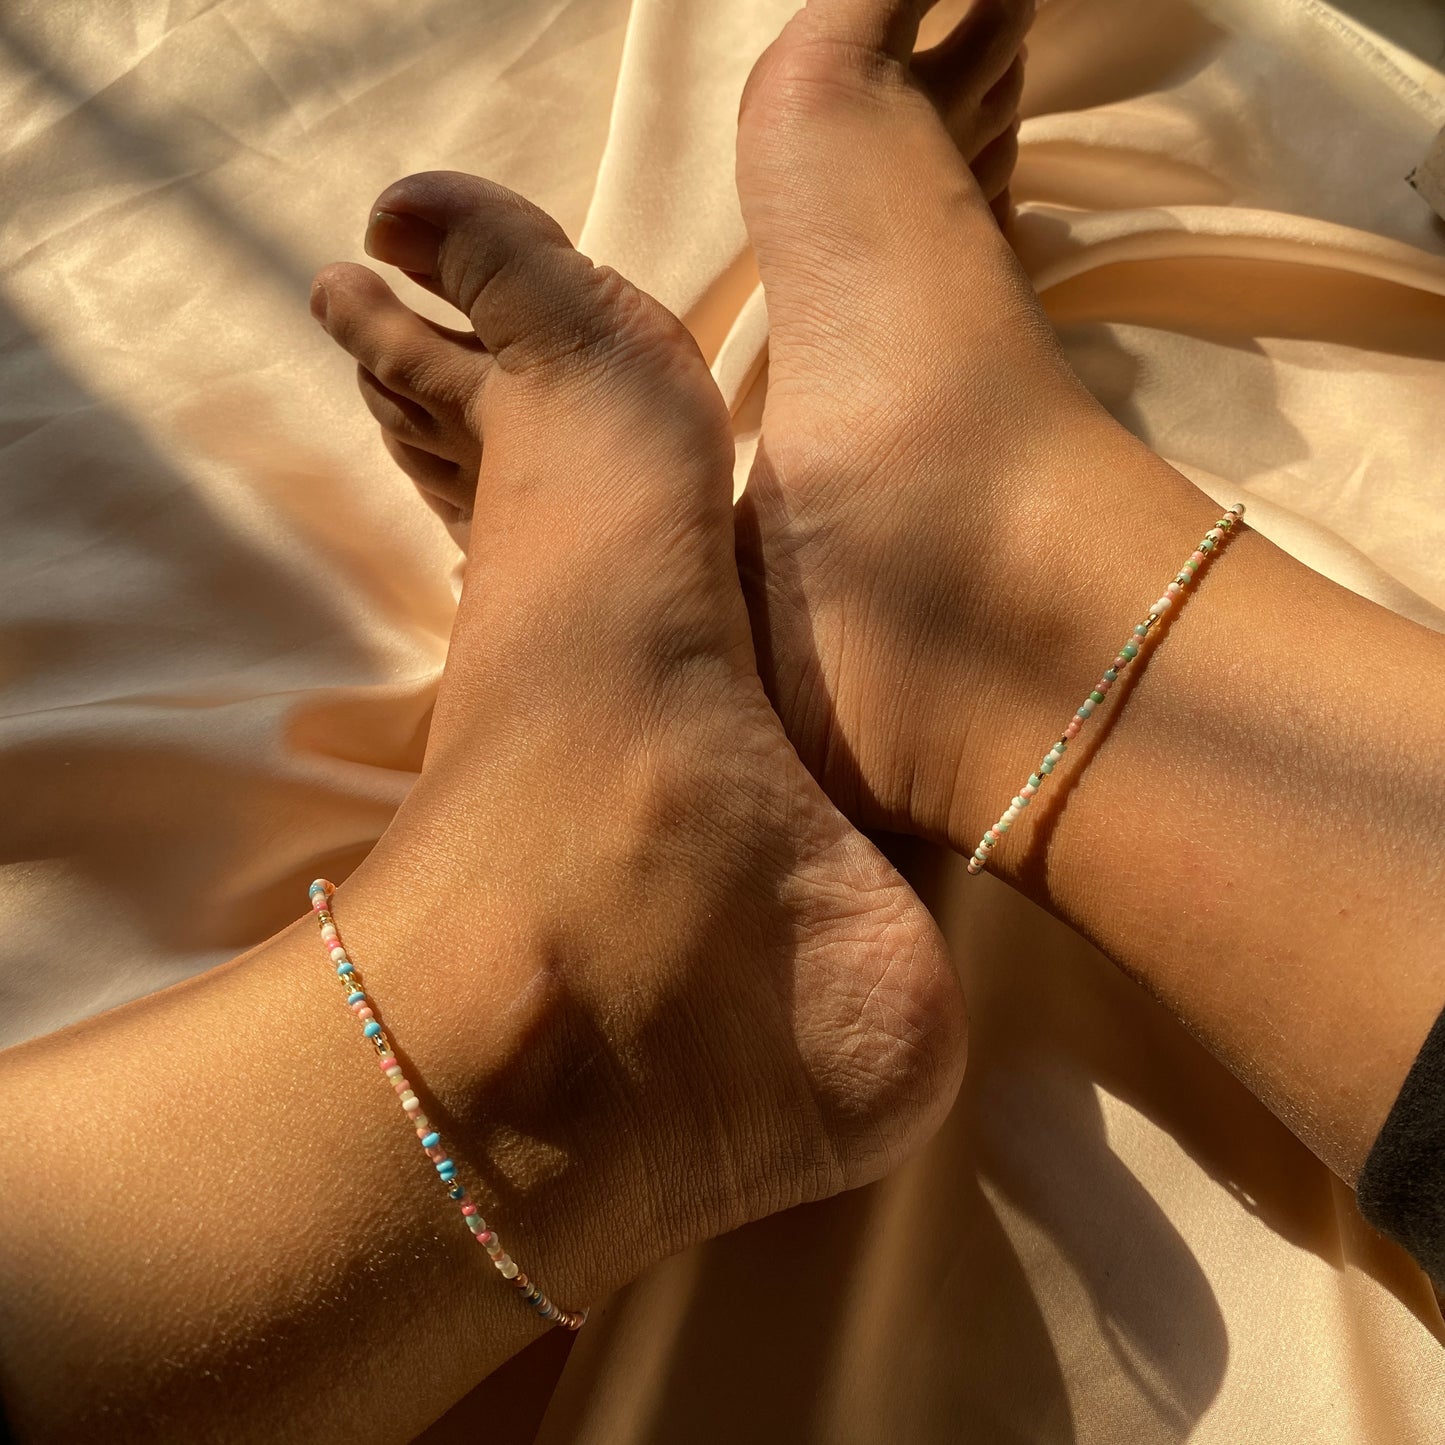 Blueish and Greenish Pastel Anklets